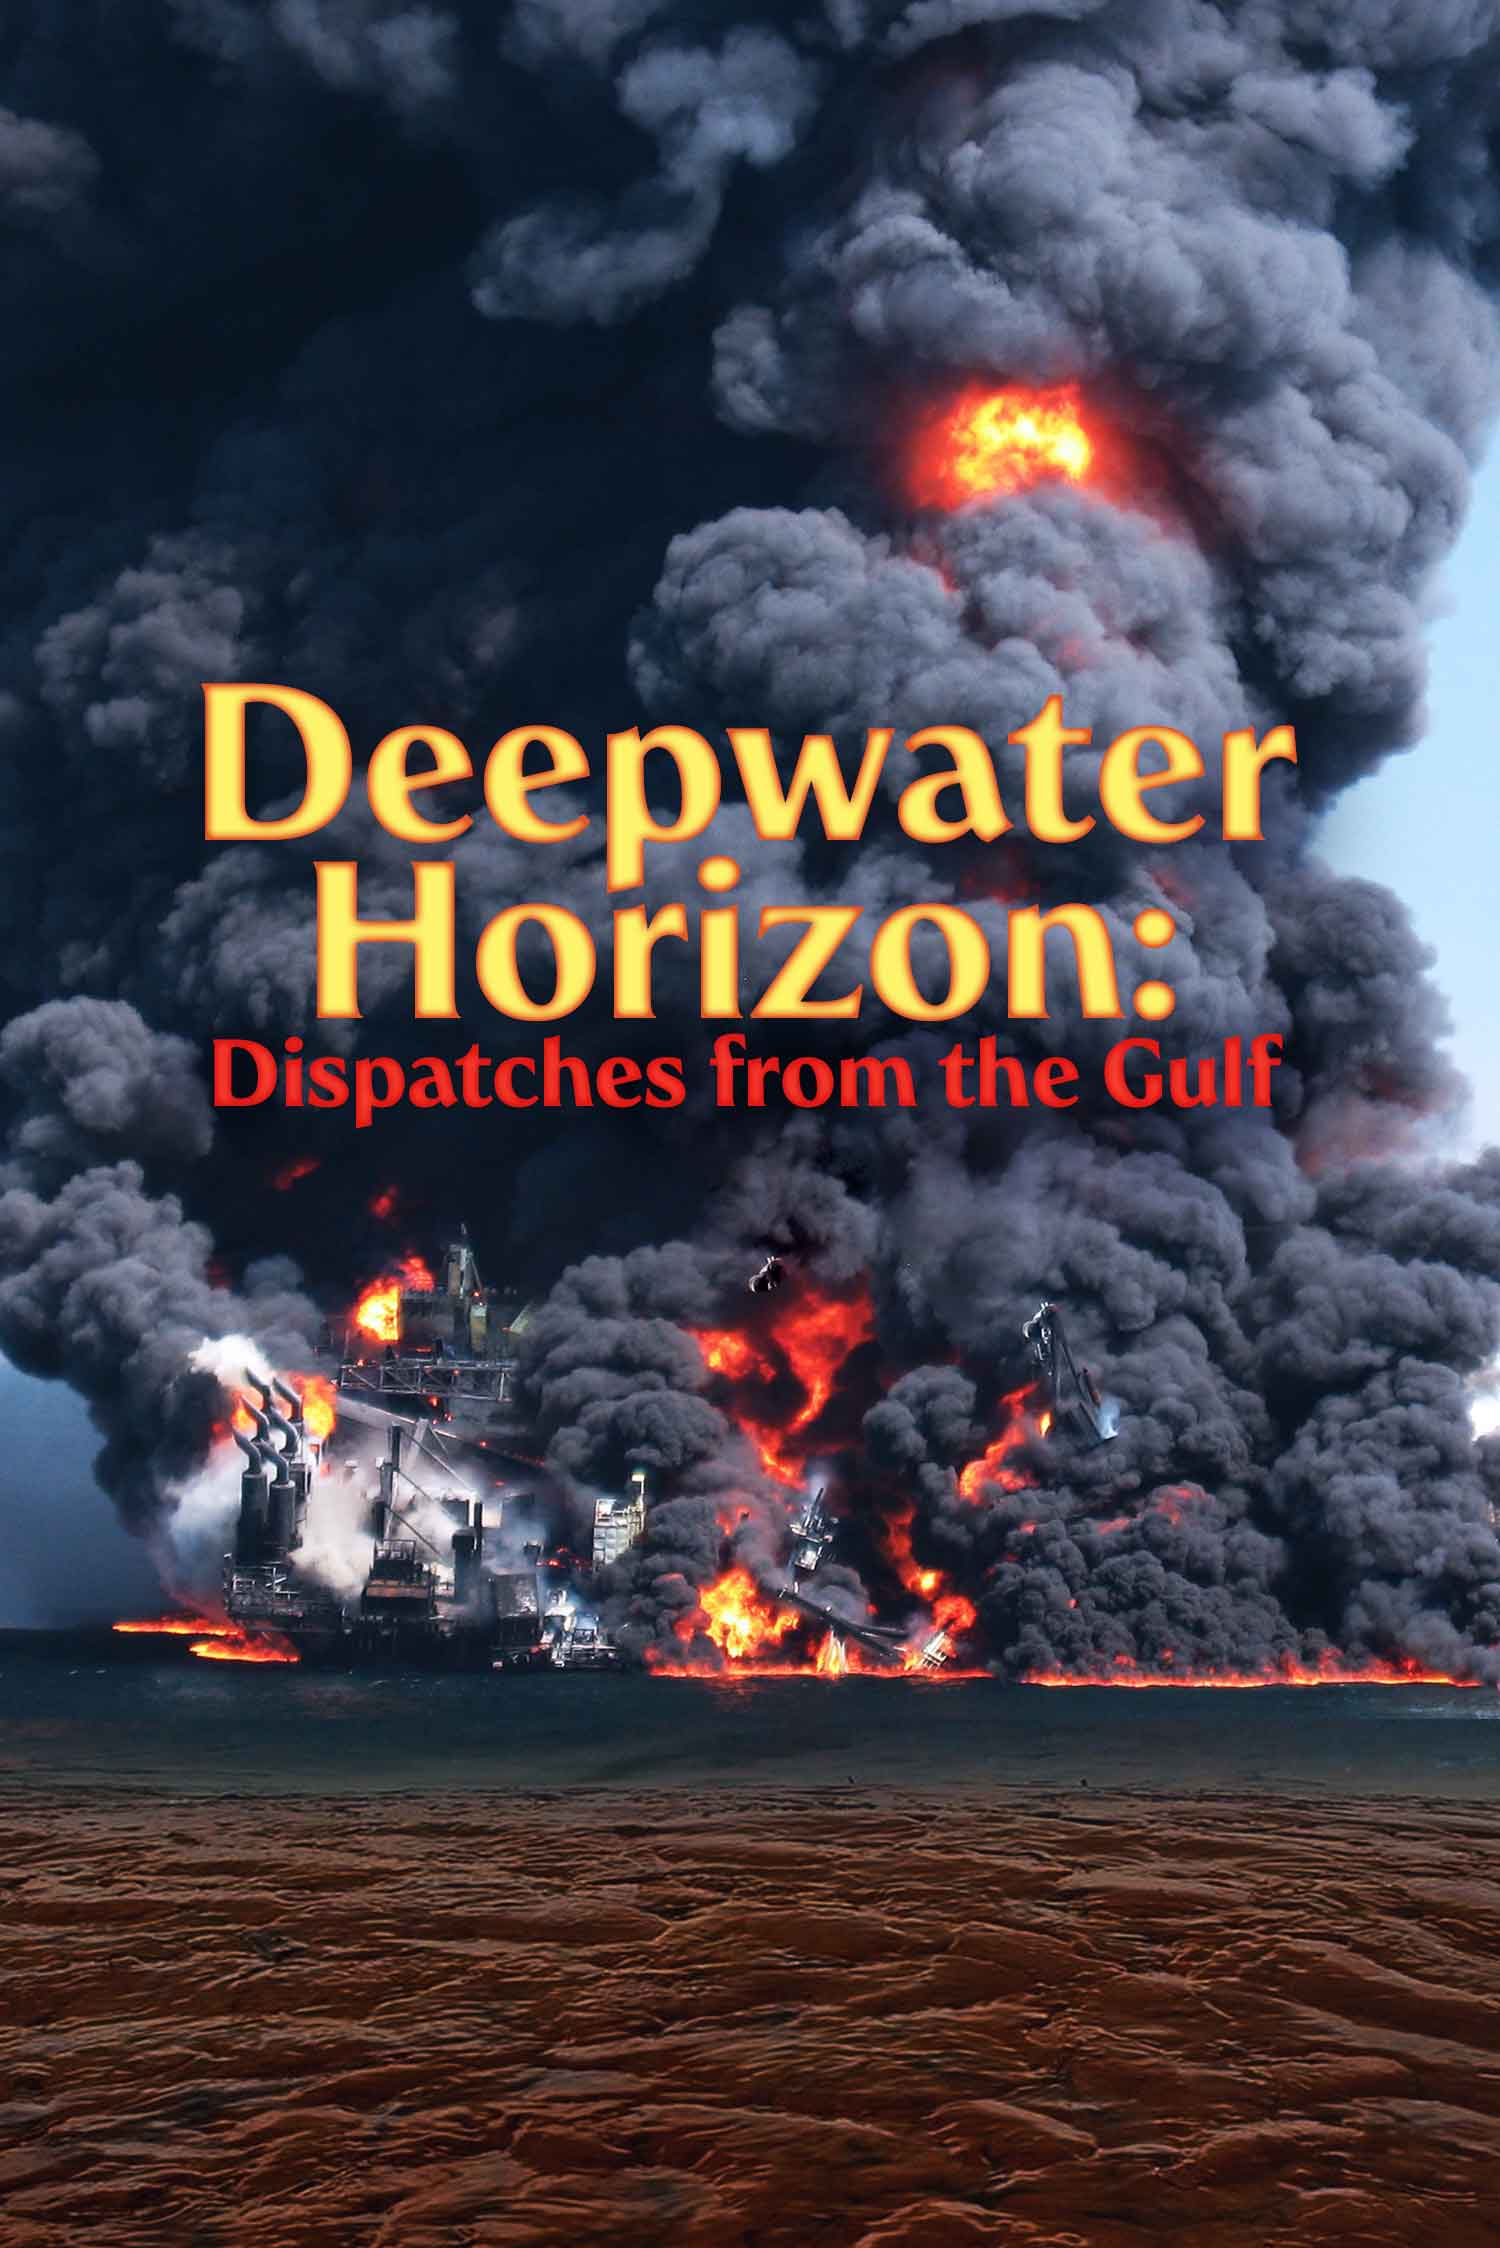 Deepwater Horizon: Dispatches from the Gulf